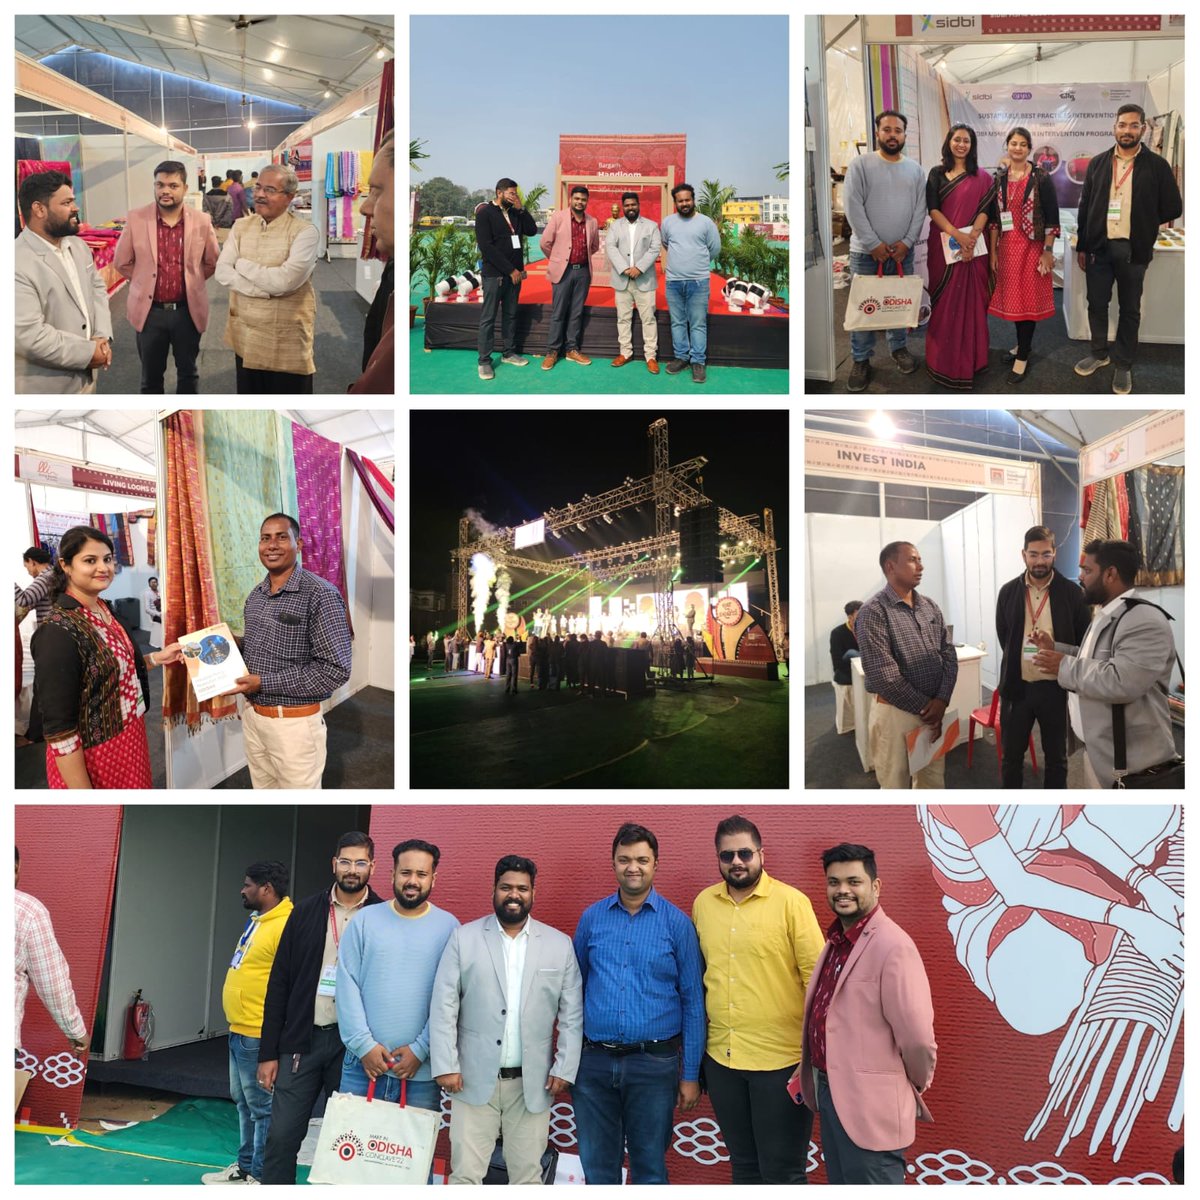 🌟 *Successful Handloom Summit in Bargarh!* 🌟

 I'm thrilled to share the success of the Handloom Summit Bargarh. The event witnessed an incredible 12M+ online reach and gathered over 10,000 participants, with 75 exhibitors from 20 states.